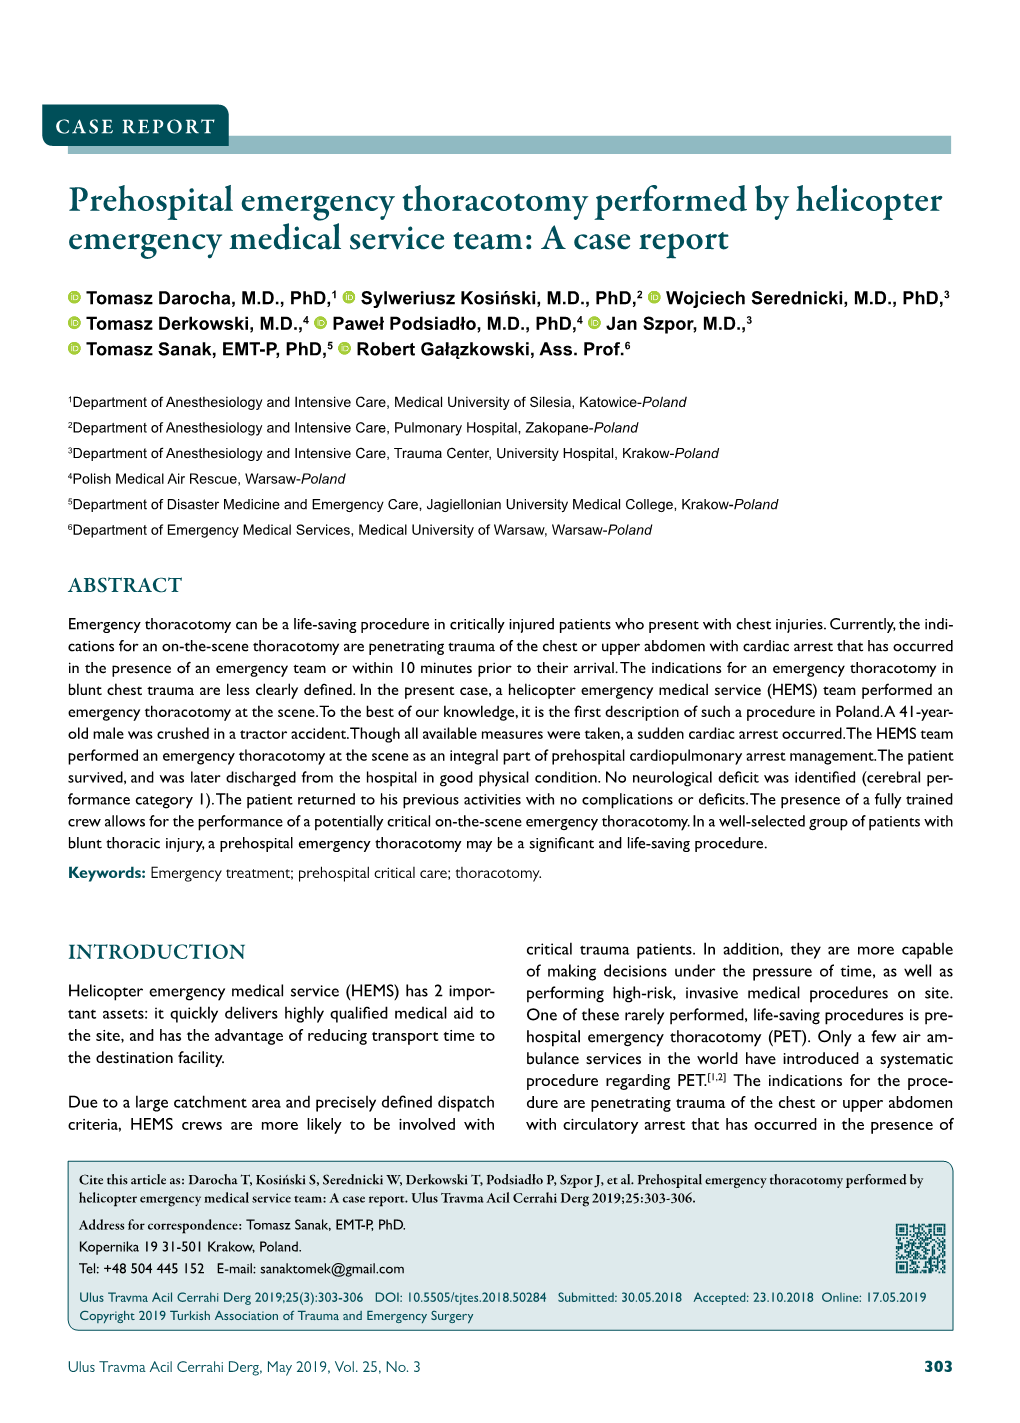 Prehospital Emergency Thoracotomy Performed by Helicopter Emergency Medical Service Team: a Case Report